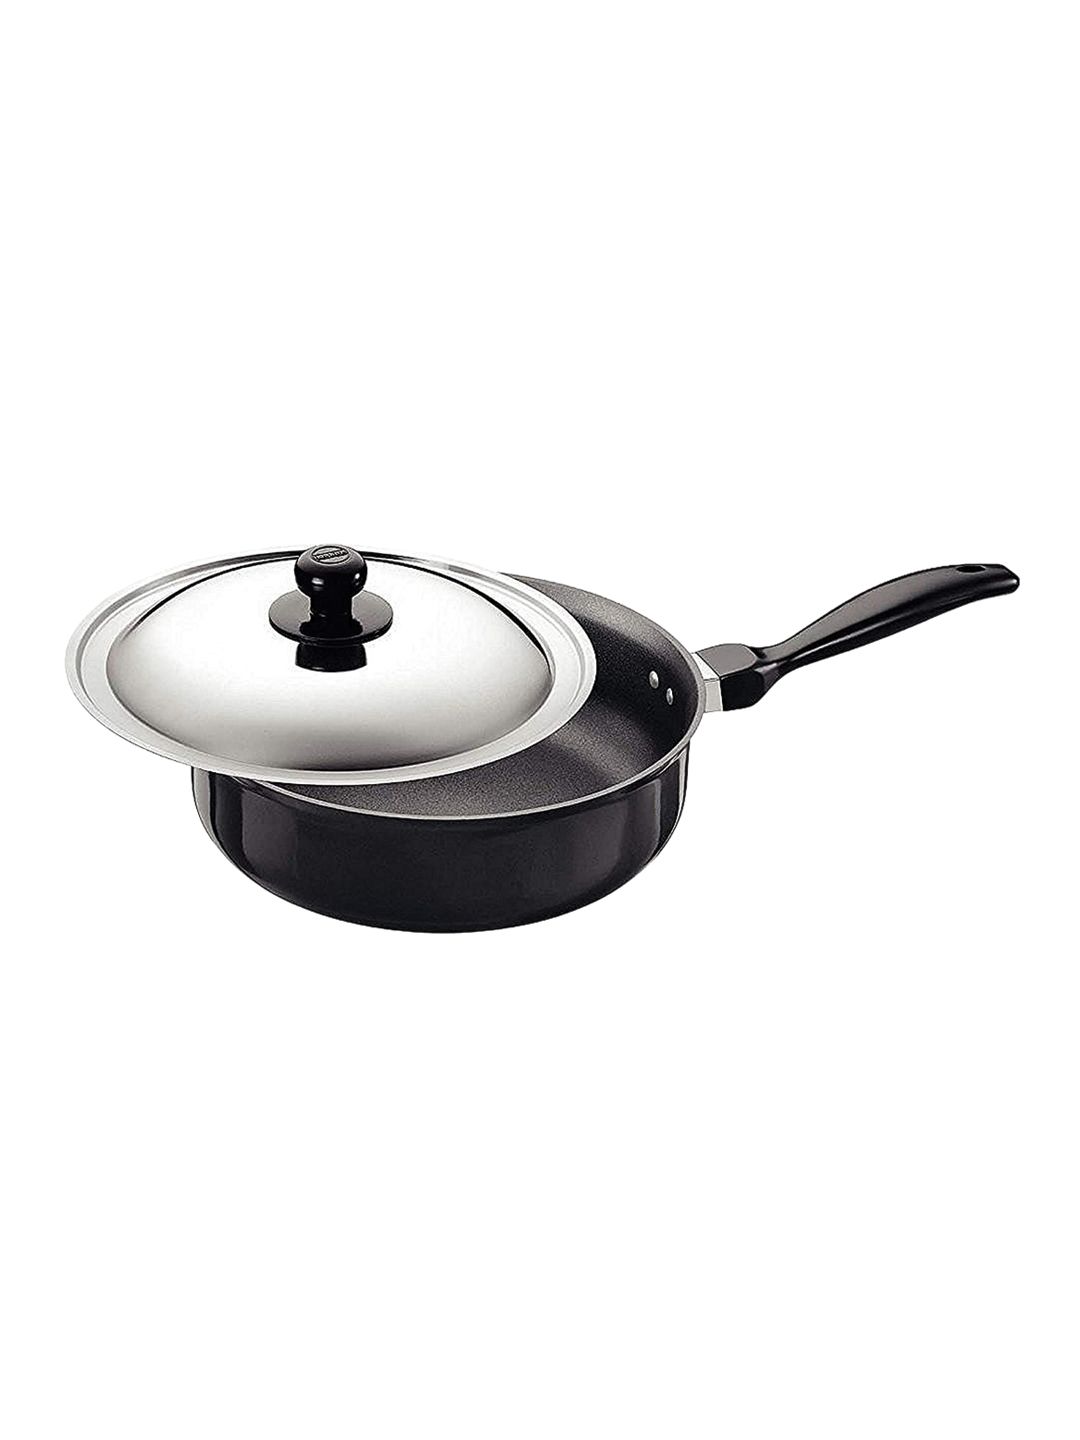 Hawkins Black Hard Anodised NonStick 3.25 mm Frying Pan With Stainless Steel Lid Price in India